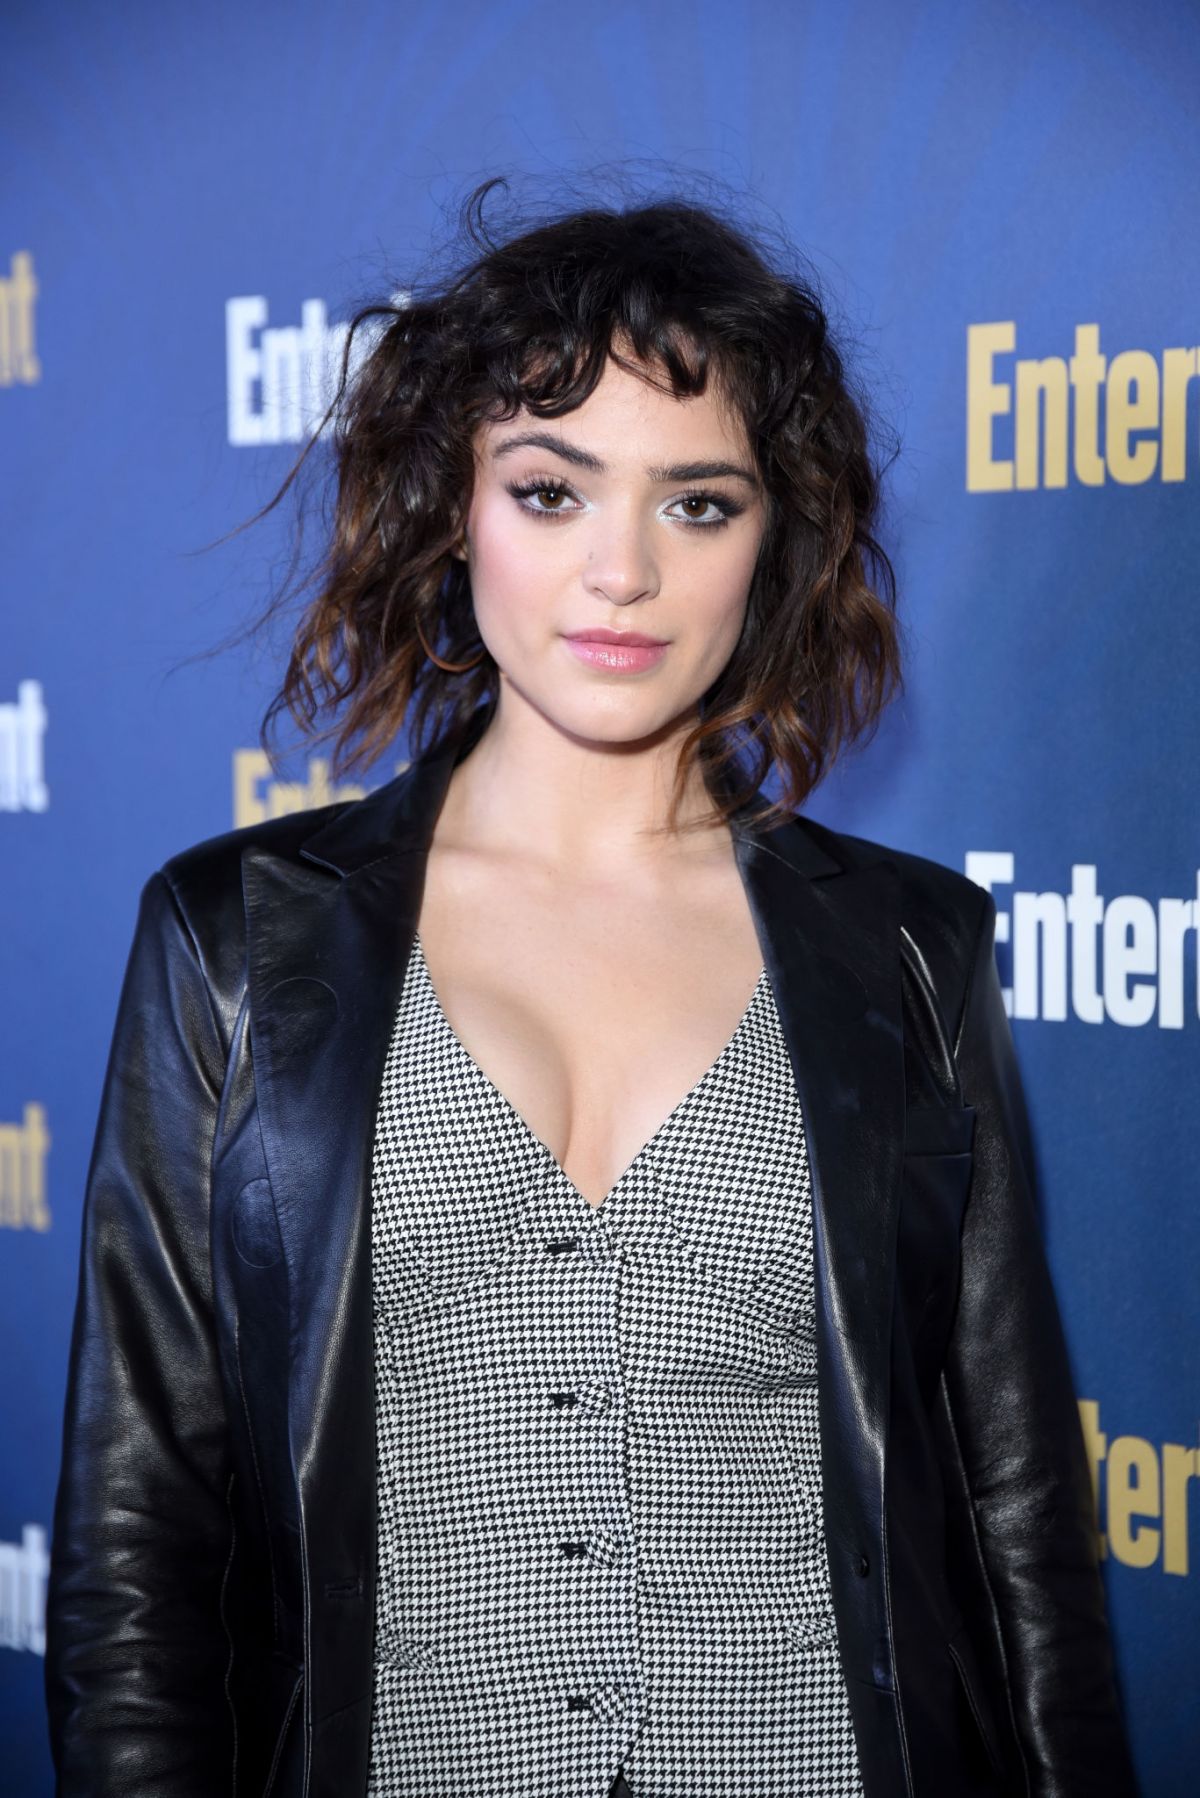 LUNA BLAISE at Entertainment Weekly Pre-sag Celebration in Los Angeles ...